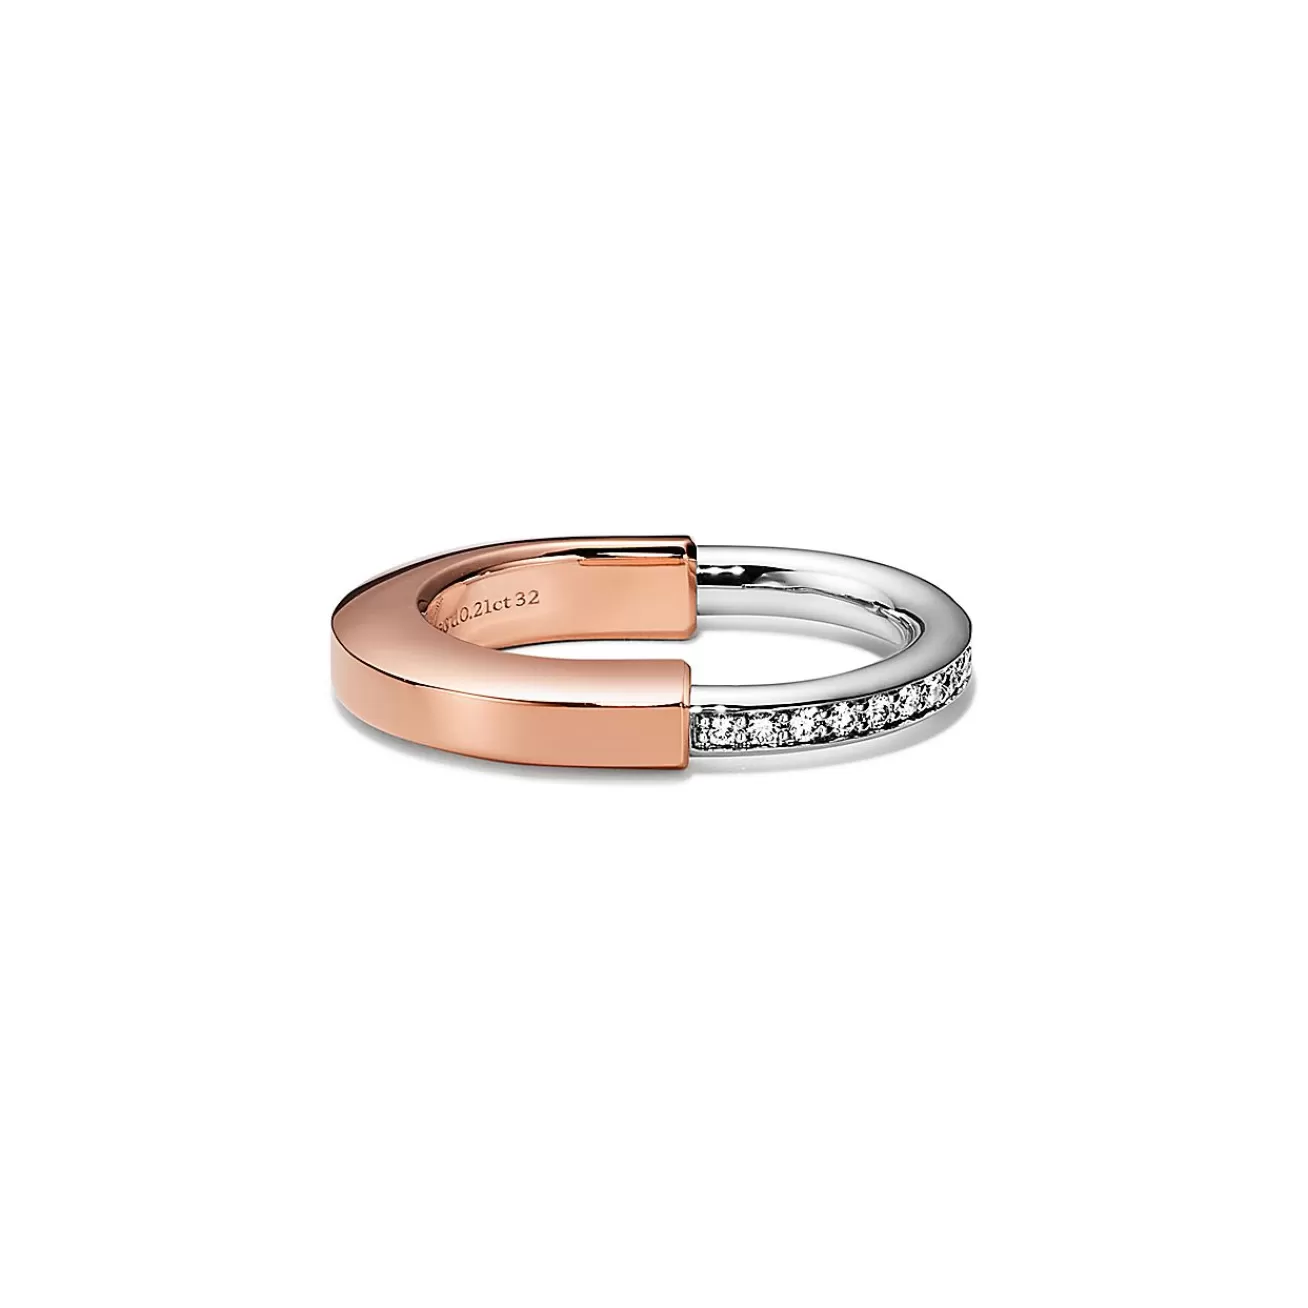 Tiffany & Co. Tiffany Lock Ring in Rose and White Gold with Diamonds | ^ Rings | Stacking Rings